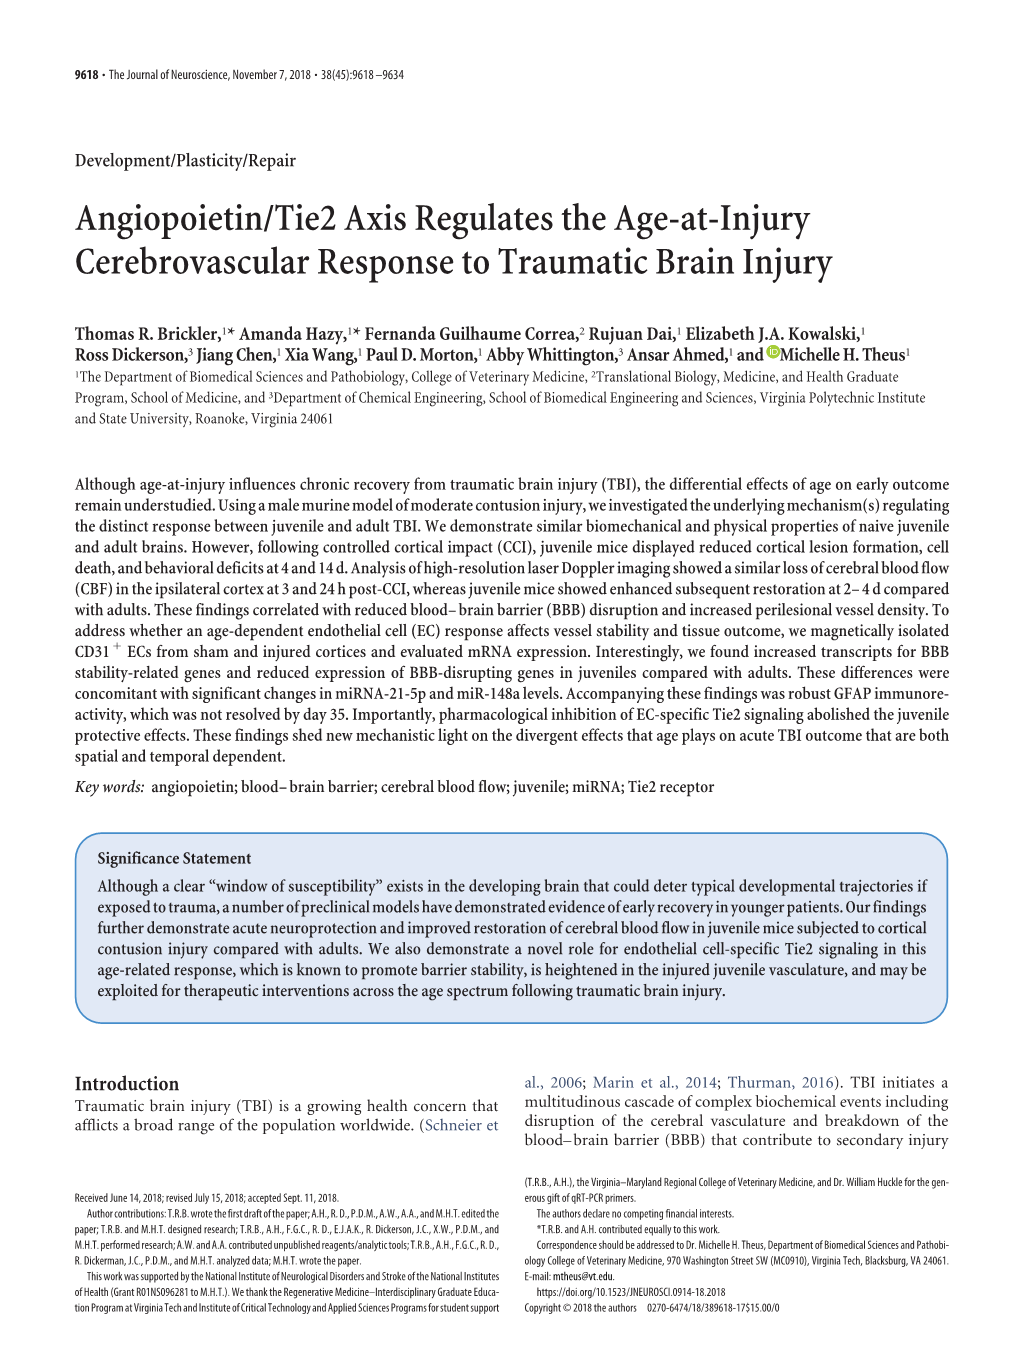 Angiopoietin/Tie2 Axis Regulates the Age-At-Injury Cerebrovascular Response to Traumatic Brain Injury